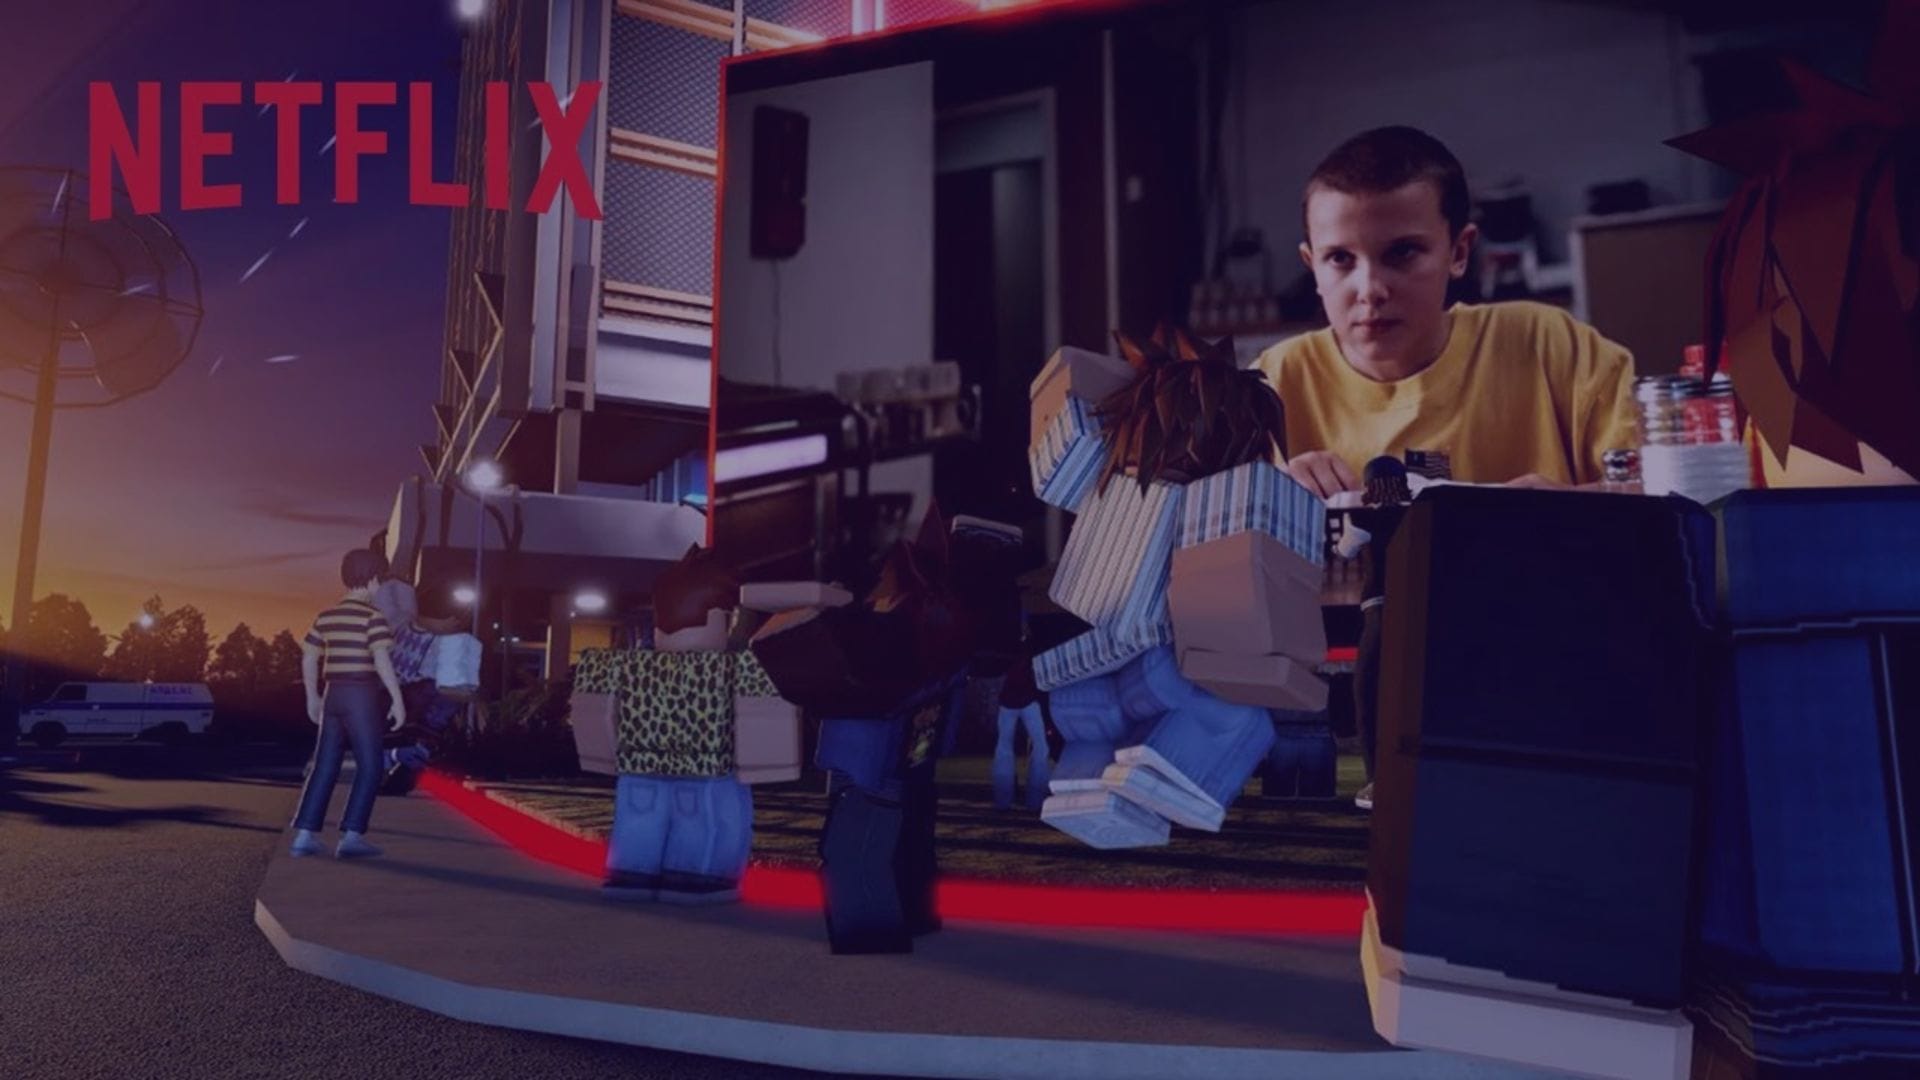 Netflix launches interactive Stranger Things world in Roblox, Marketing